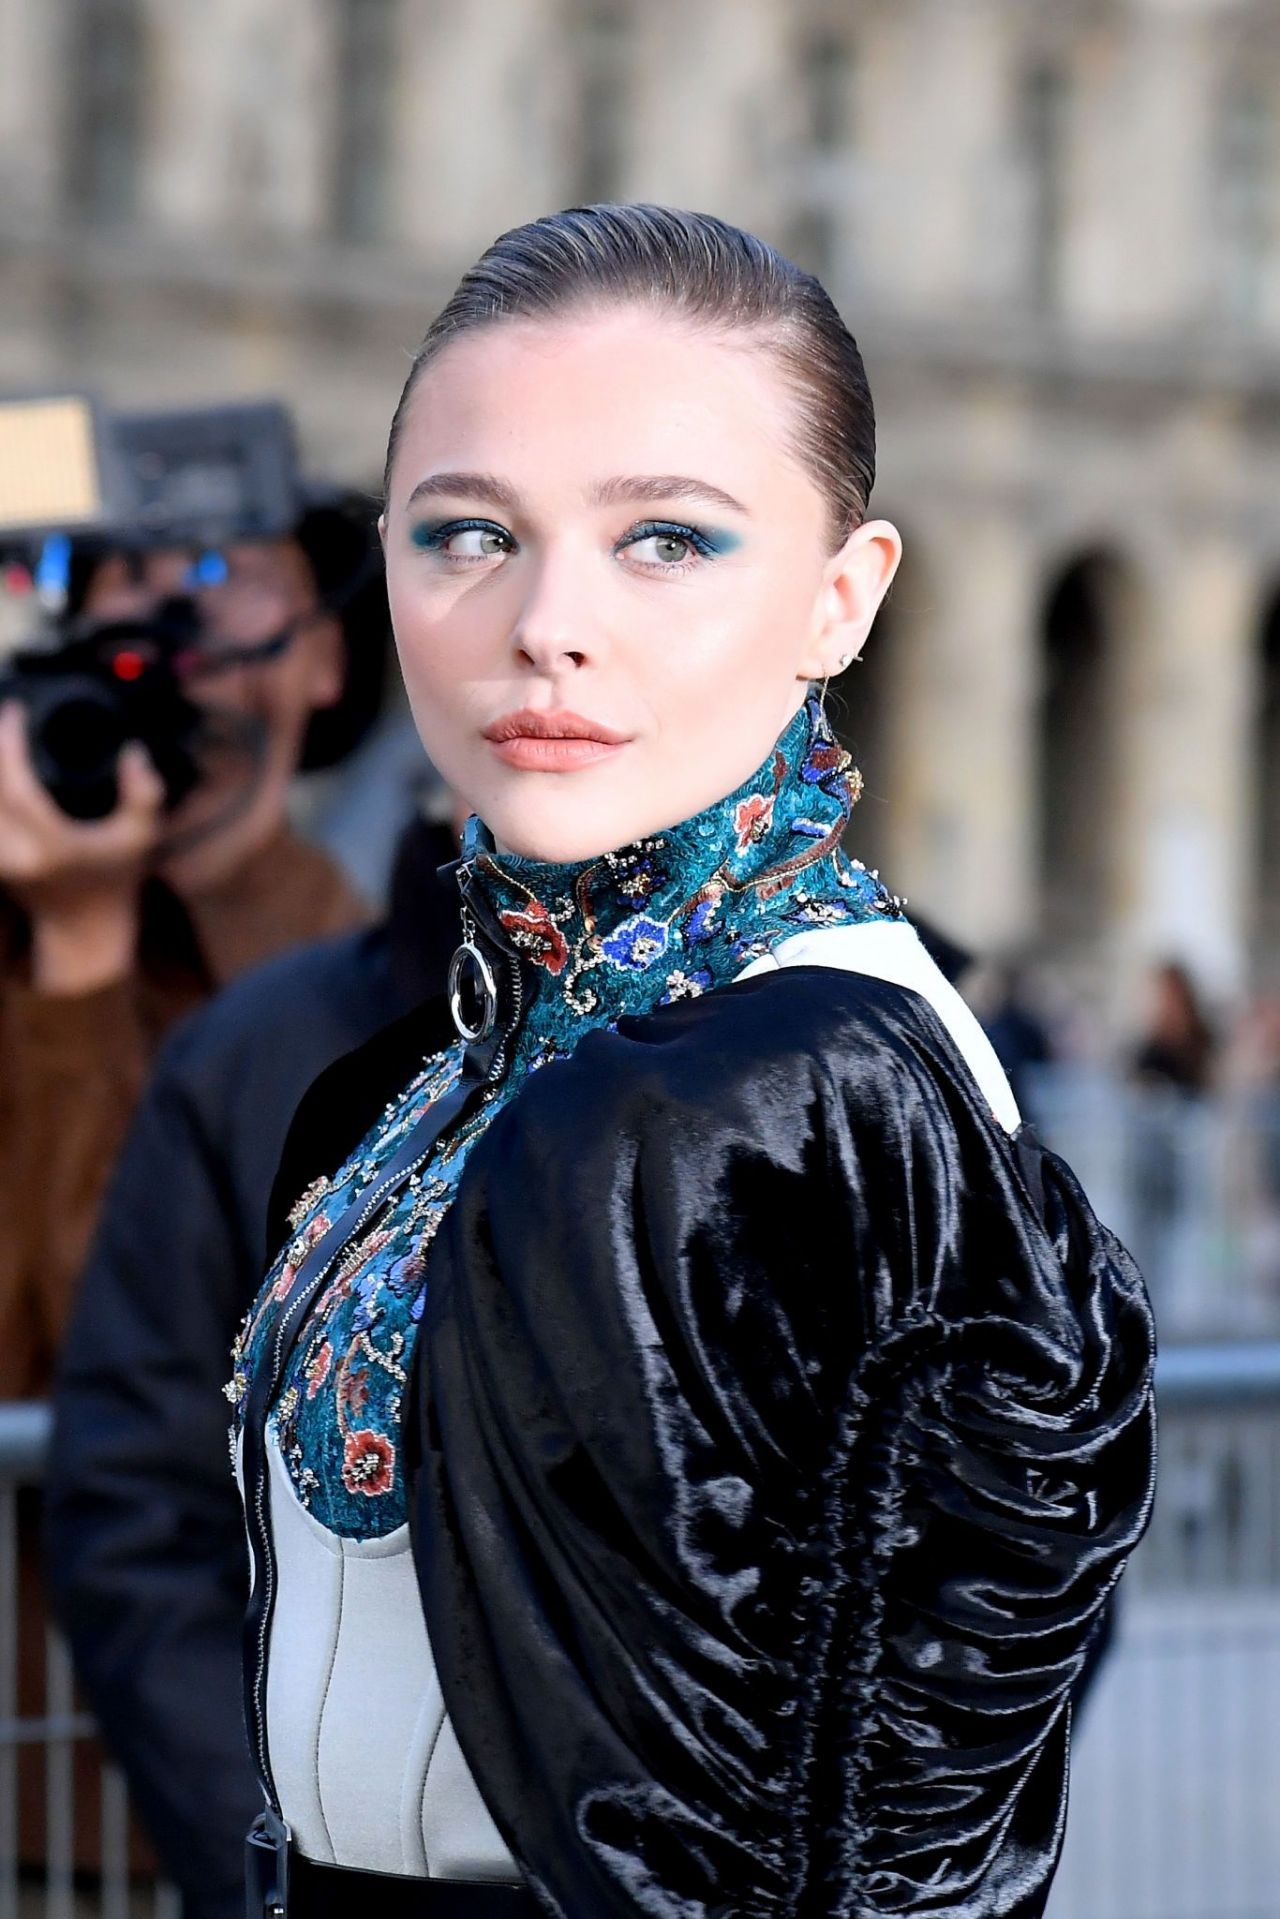 See Louis Vuitton's New Visuals, Starring Chloë Grace Moretz and